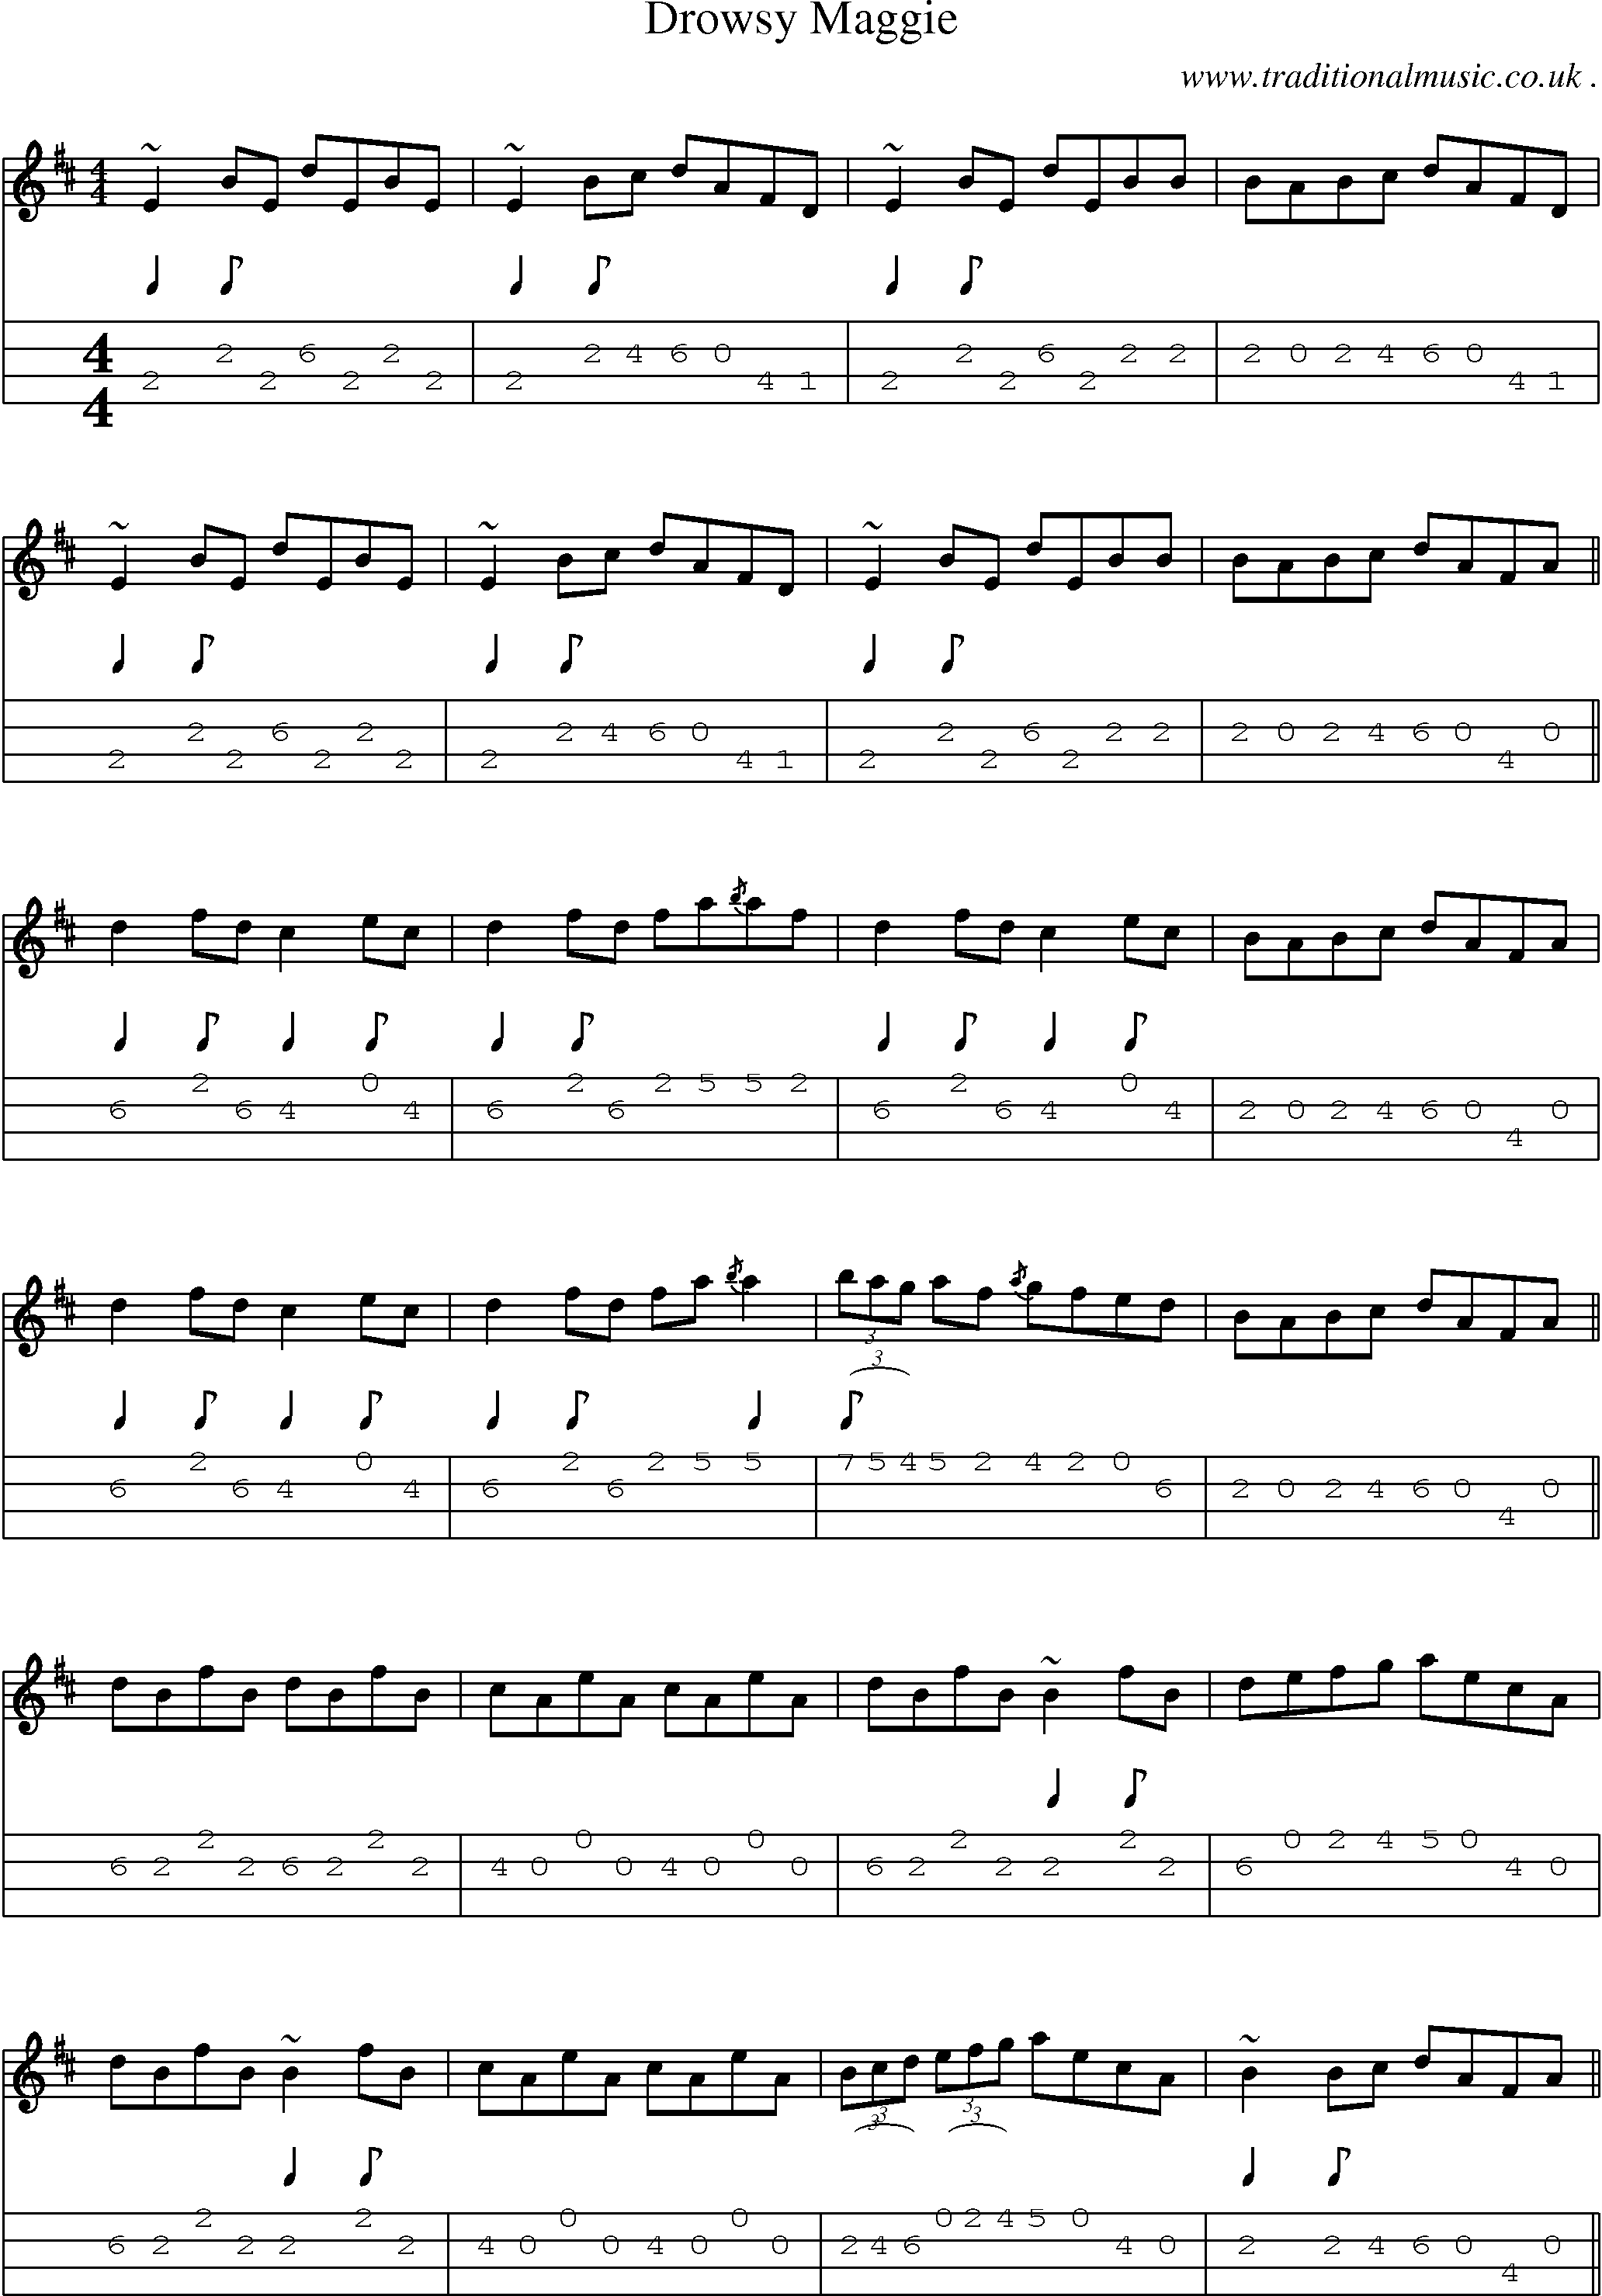 Sheet-music  score, Chords and Mandolin Tabs for Drowsy Maggie